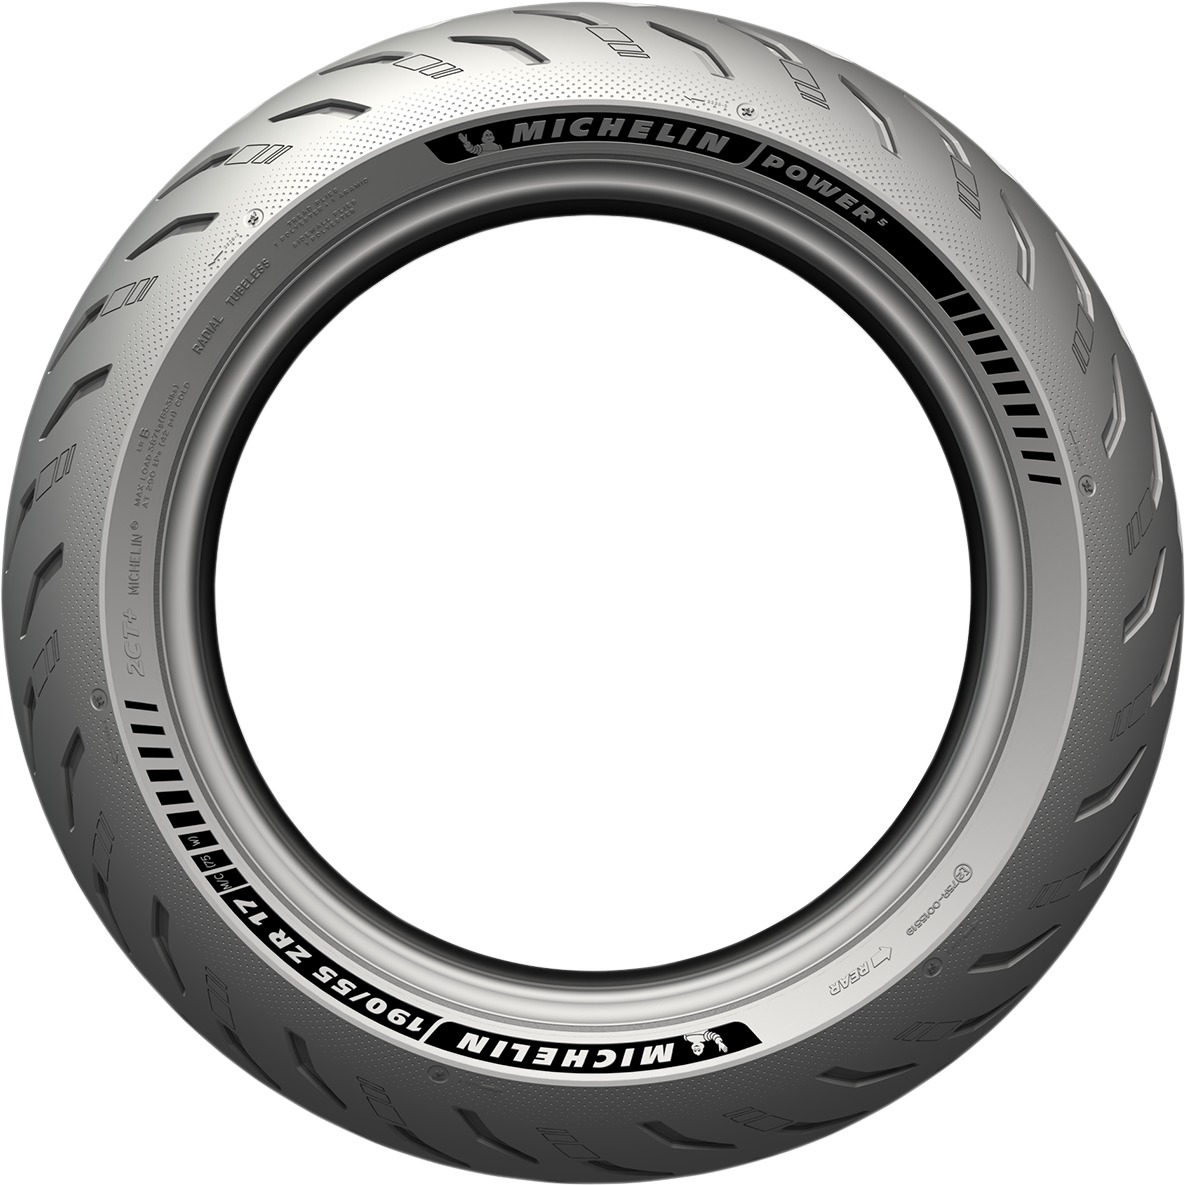 180/55ZR17 (73W) Power 5 Rear Motorcycle Tire - Click Image to Close